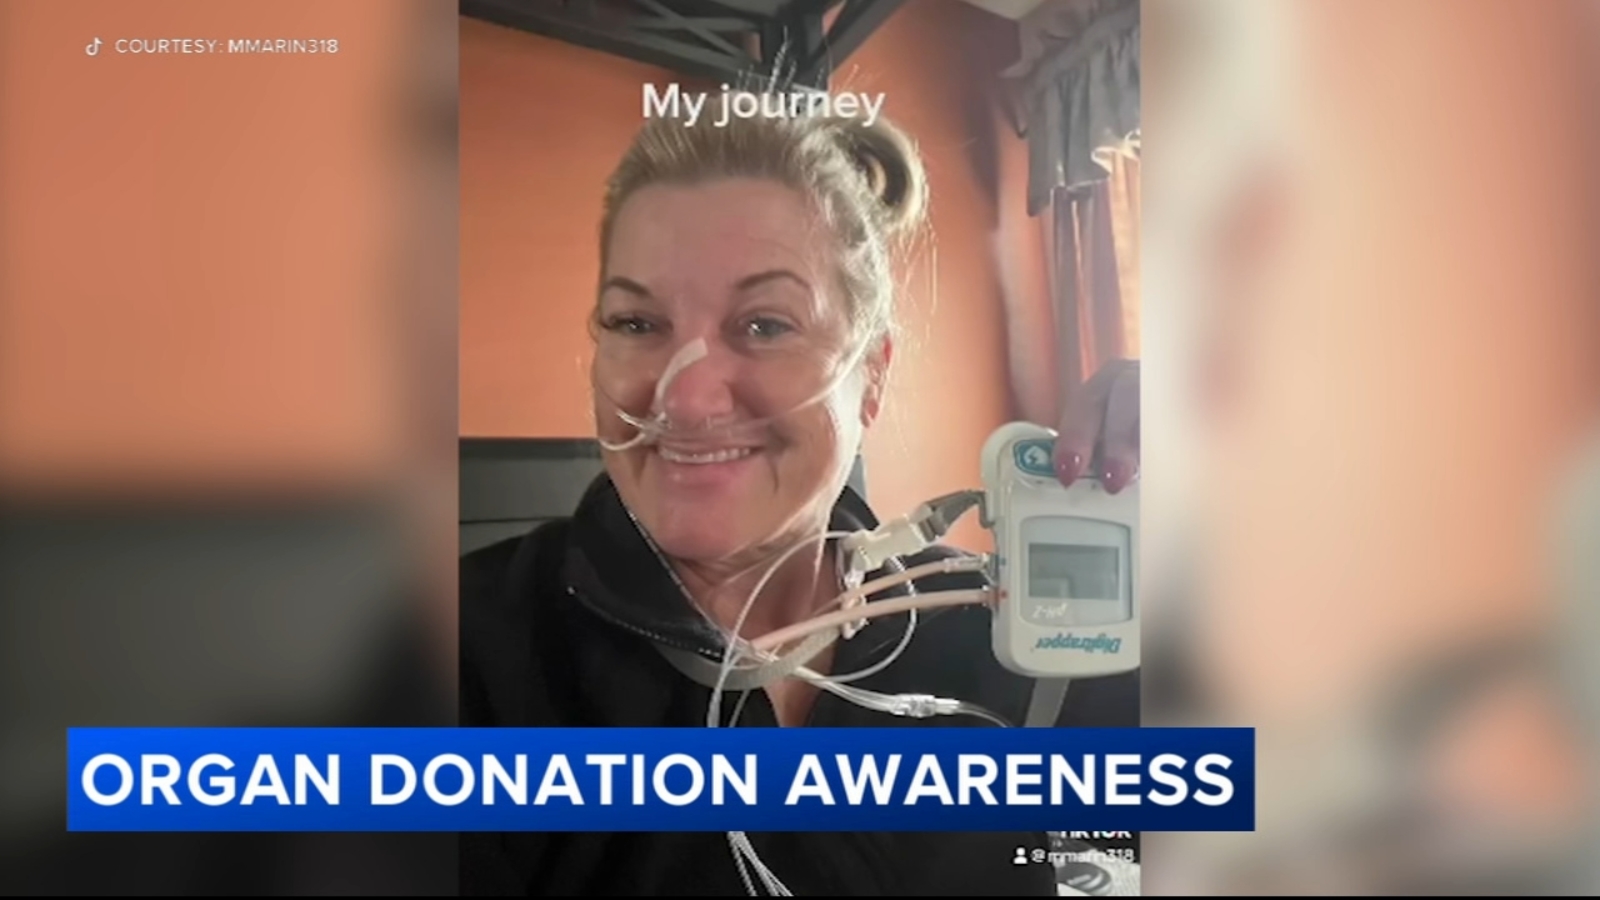 Bucks County woman Marion Marin documents lung transplant, recovery for donor awareness with Temple Lung Center [Video]